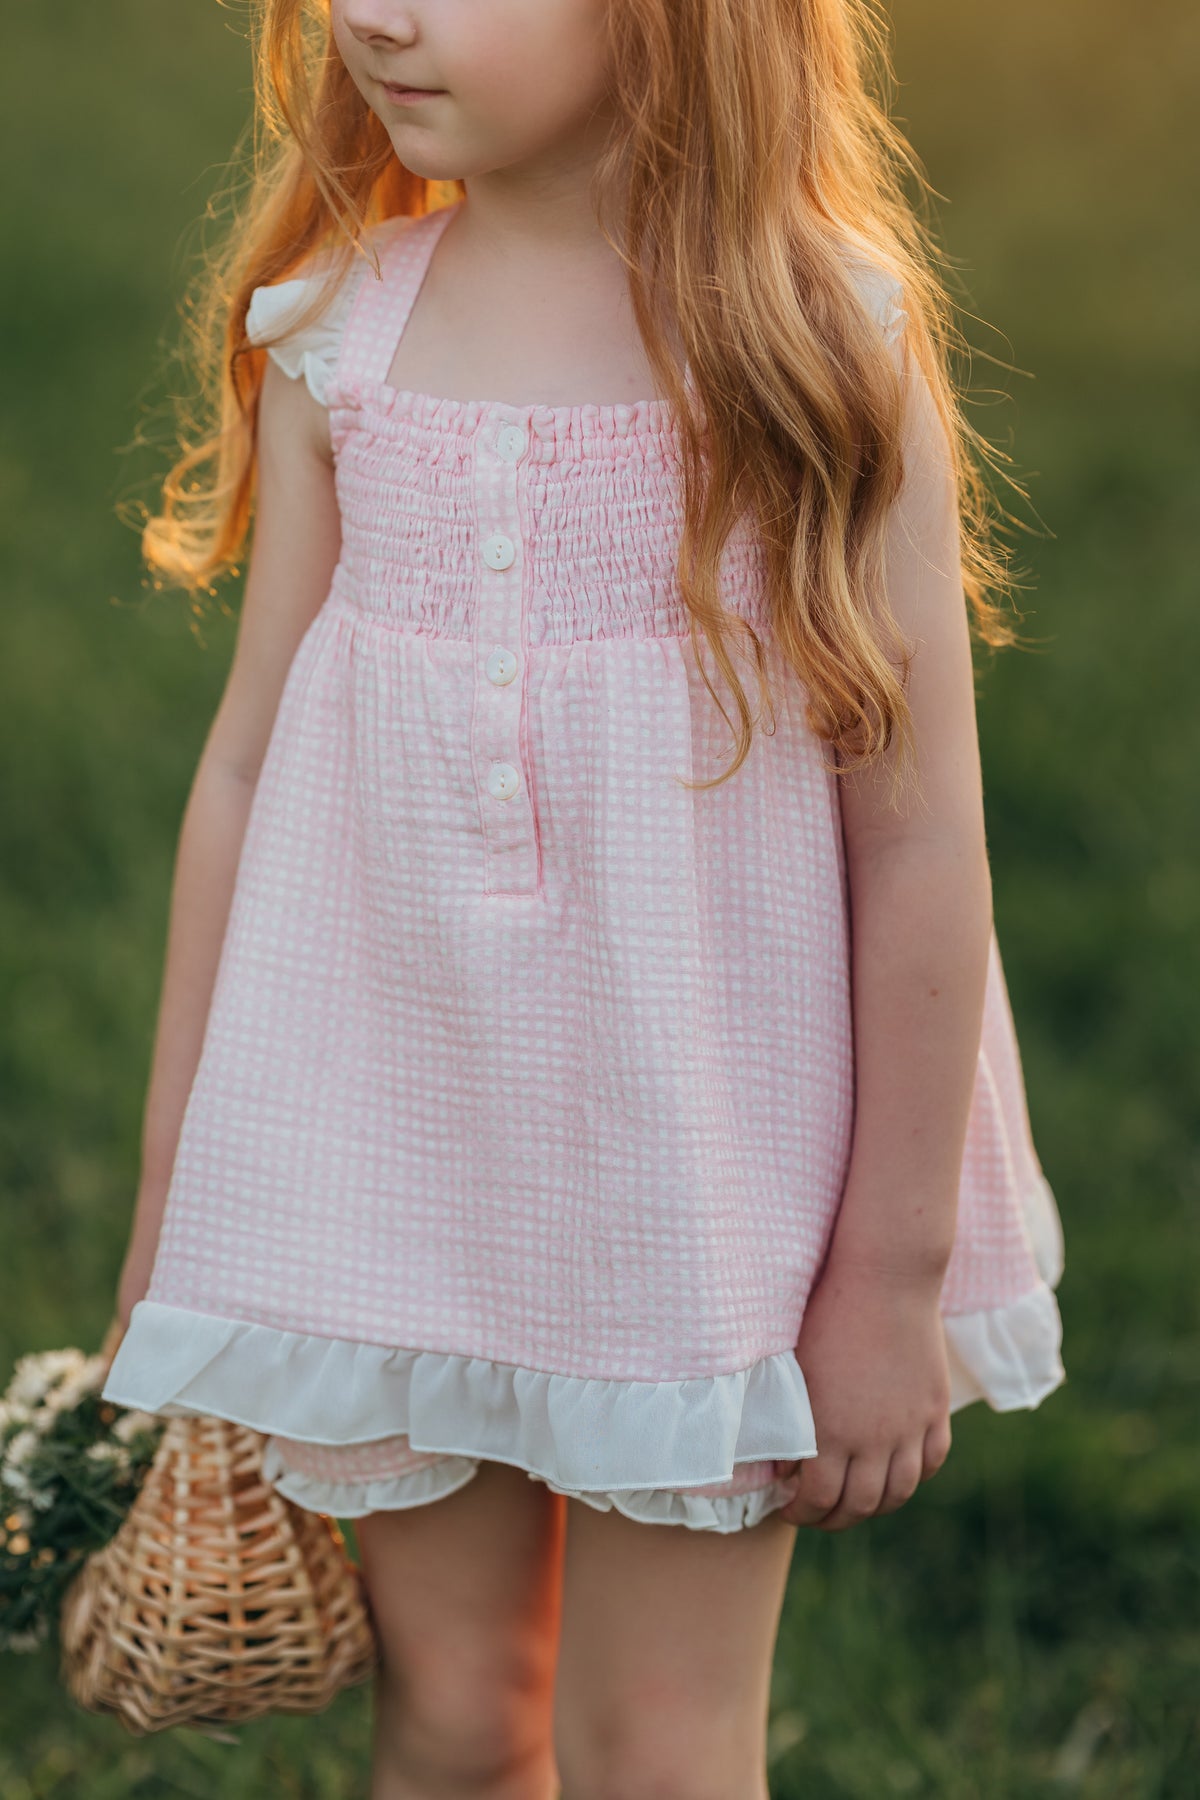 Pink Gingham Tunic and Bloomer Set